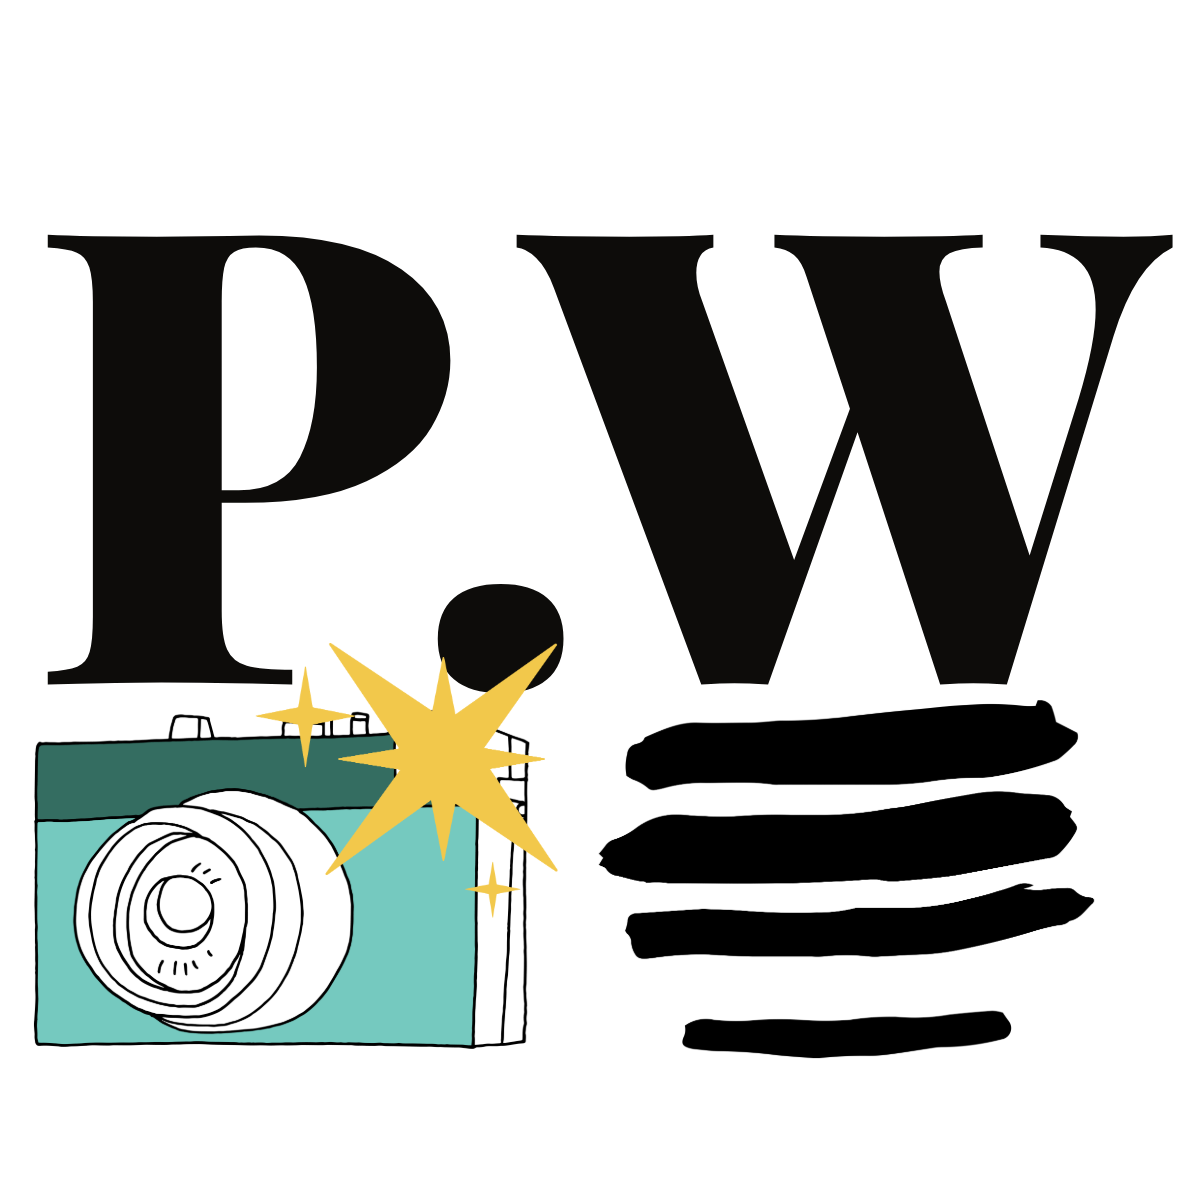 Peter Wiercioch's logo, with initials P.W above a camera found under the P and an abstract series of lines under the w